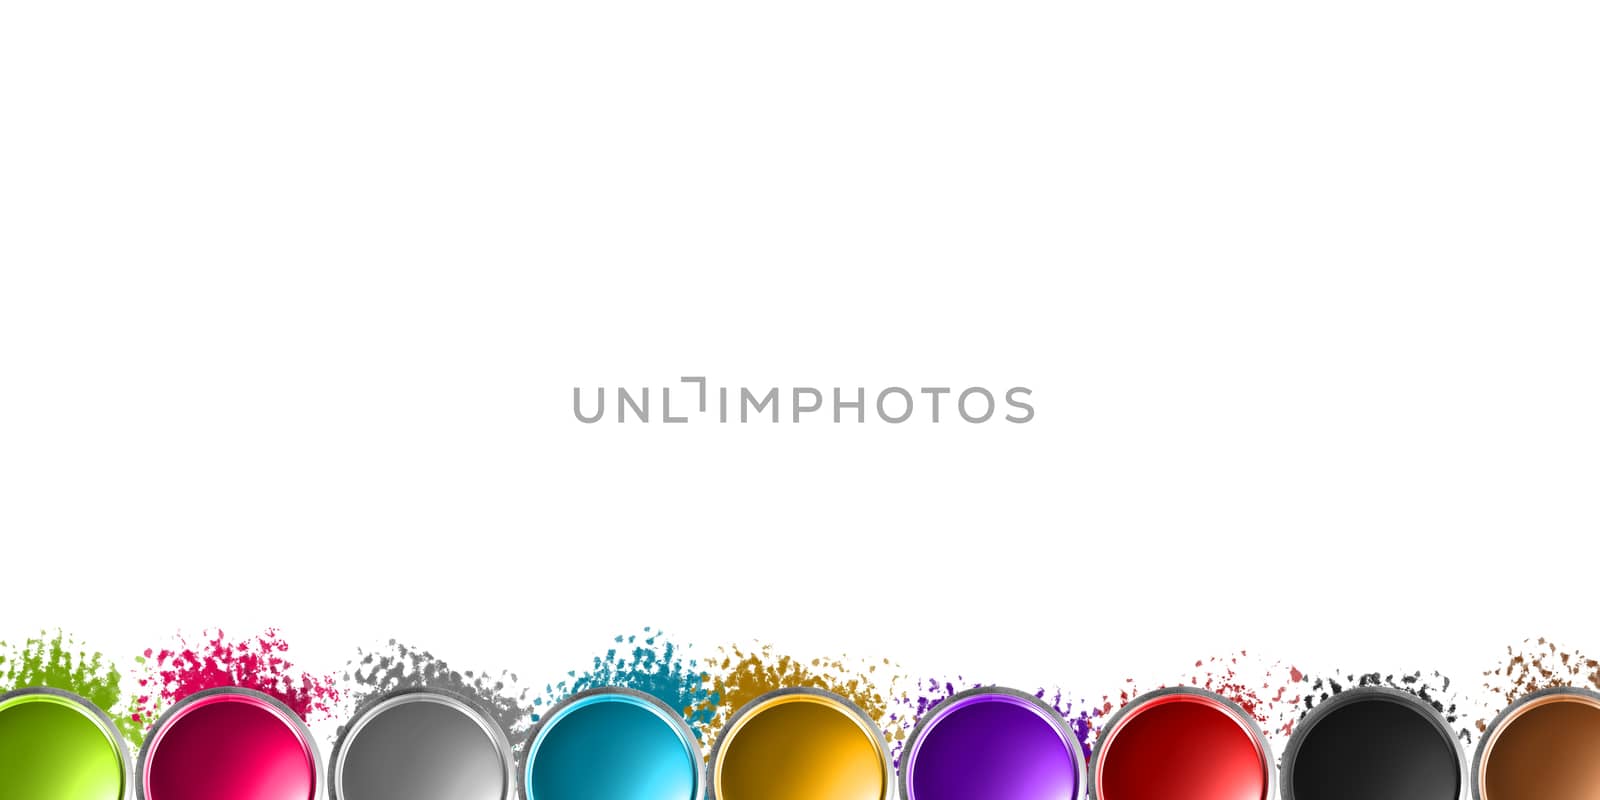 3D illustratio background of multicolored oil cans scattered on a white background.